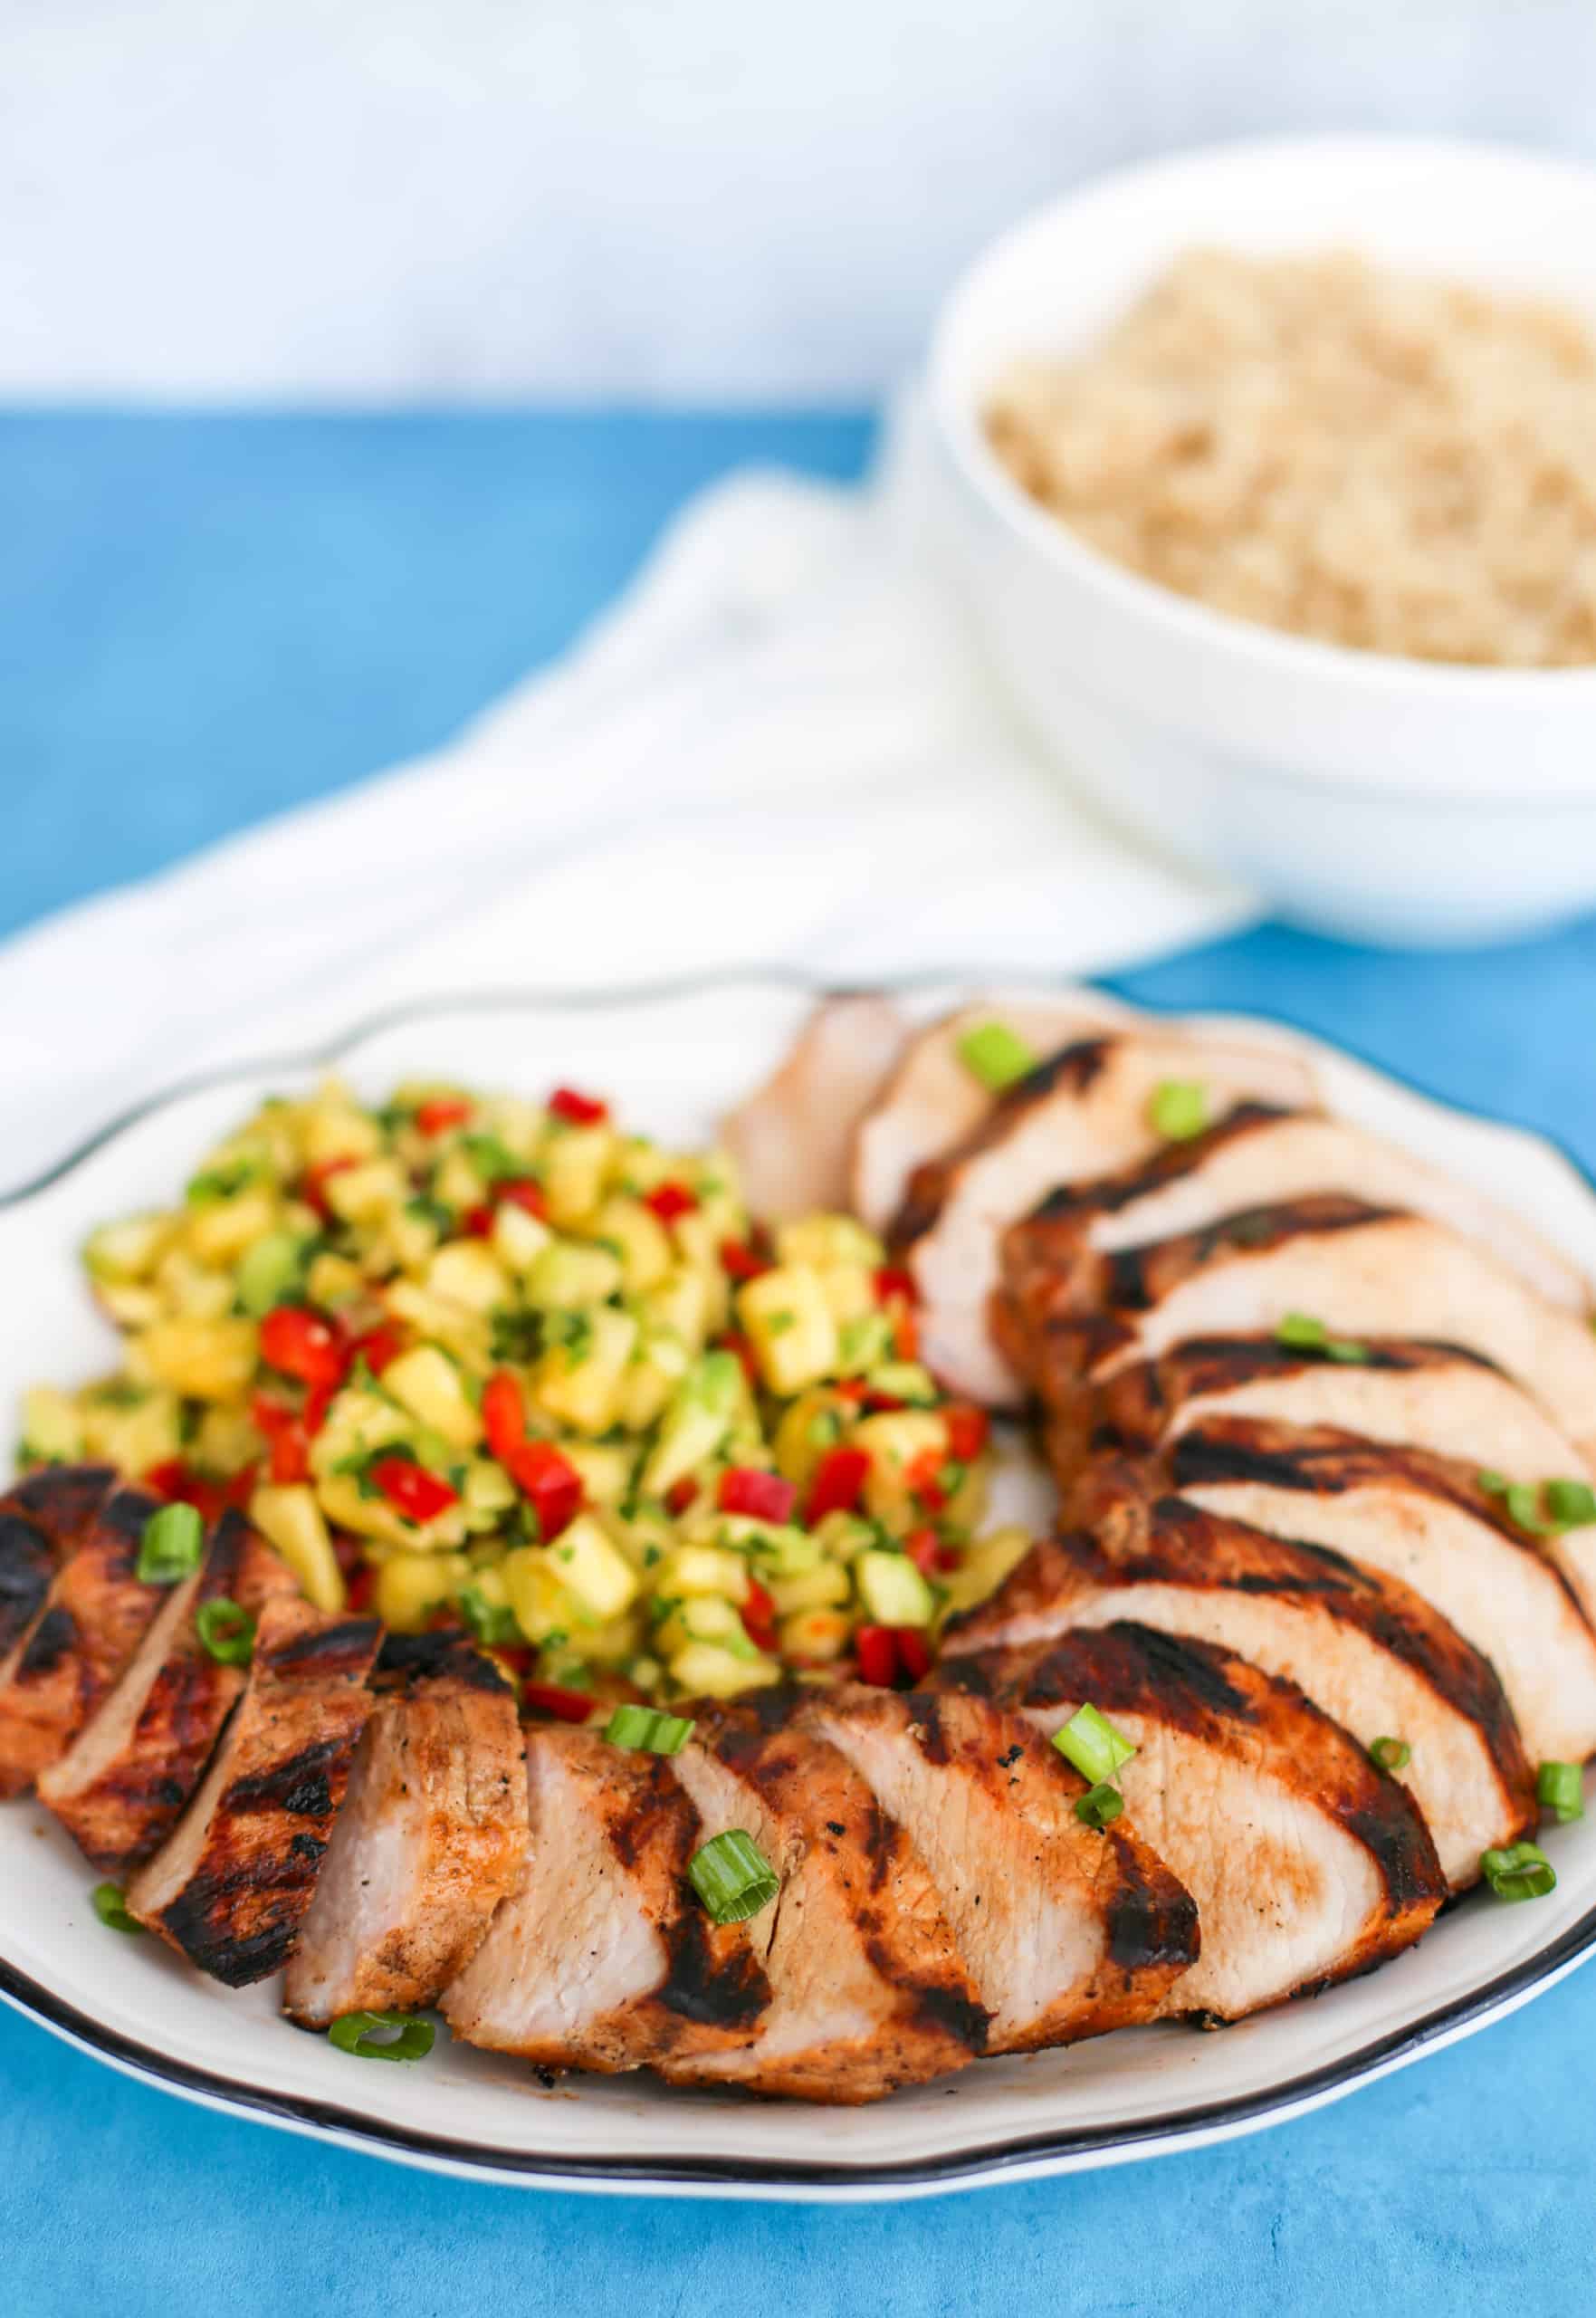 Cooked and sliced grilled pork tenderloin on a platter with Pineapple Salsa on the side and brown rice in a bowl next to it.